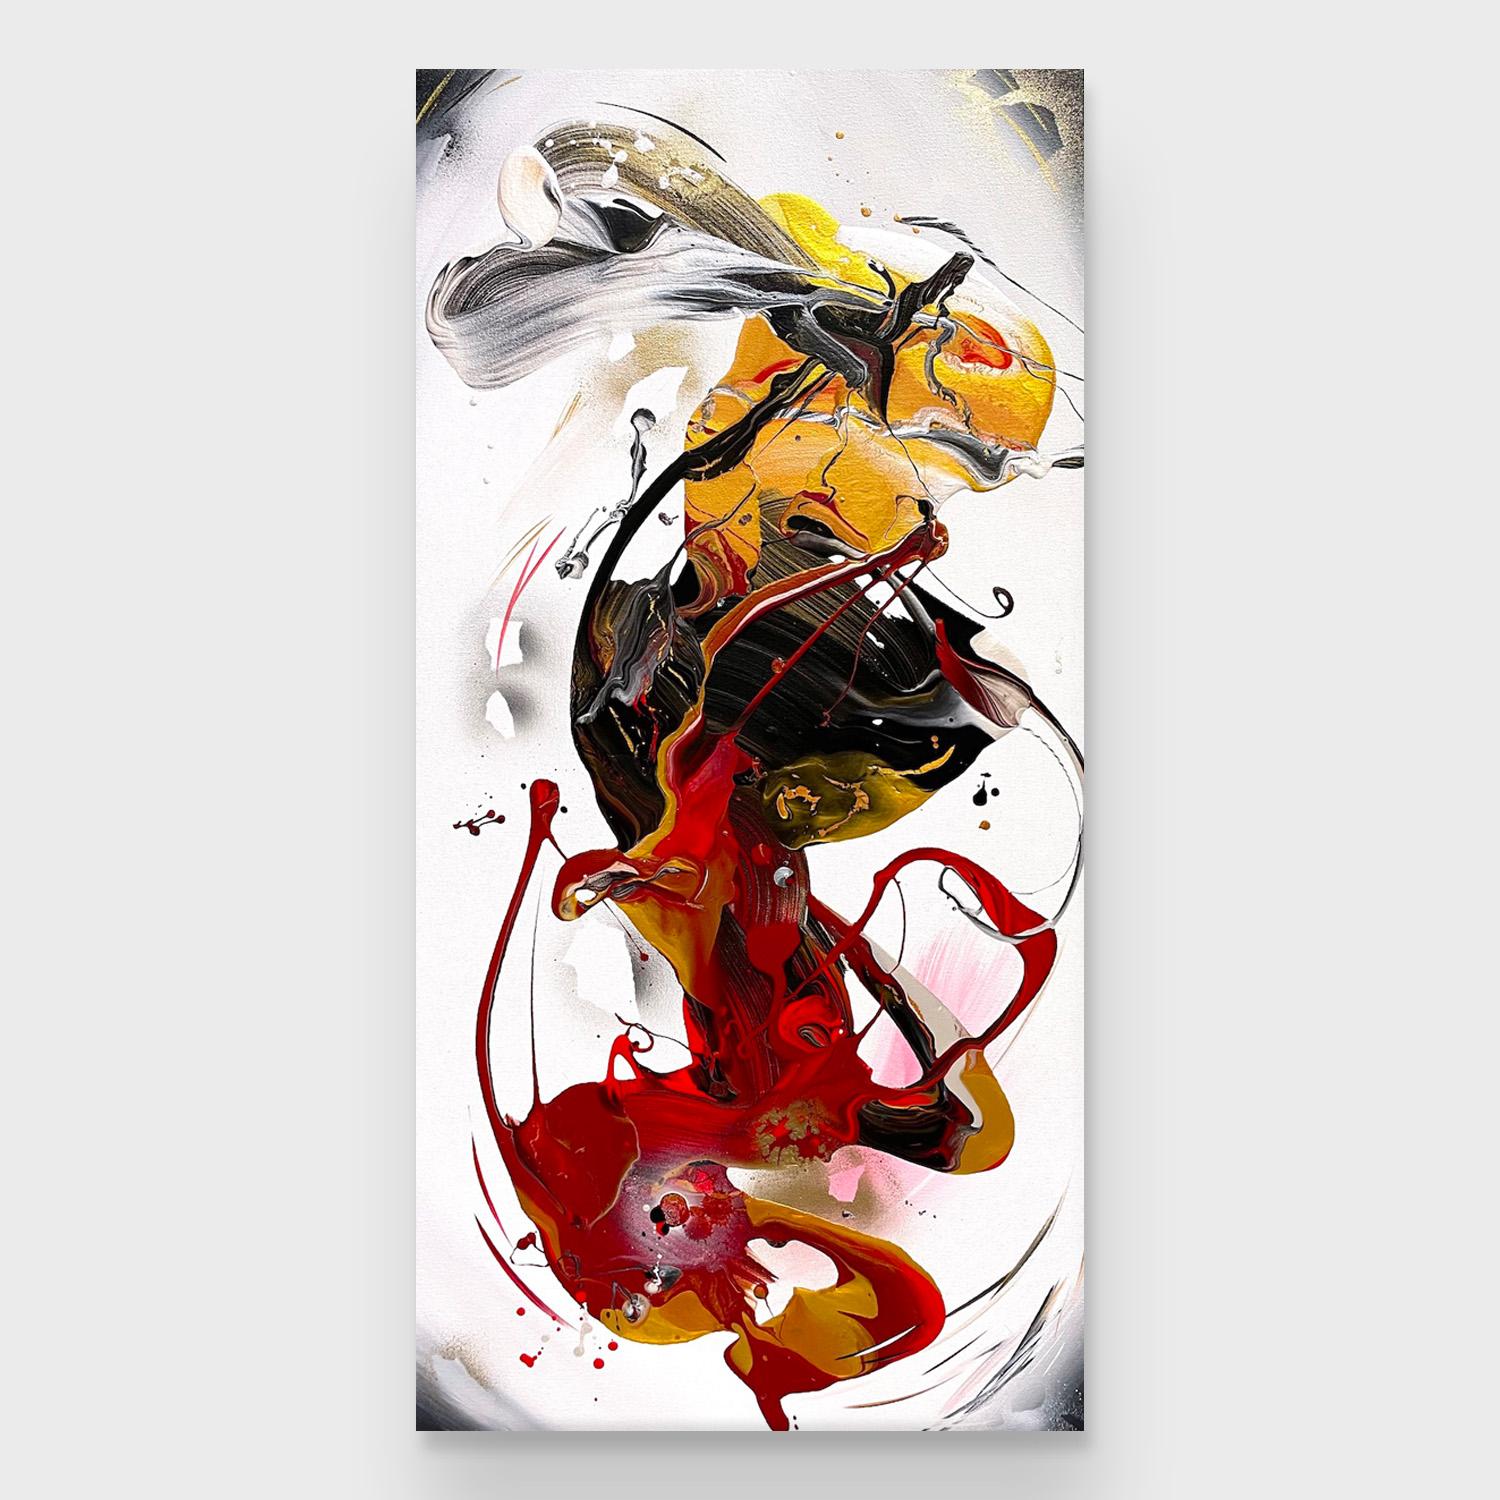 Michael Carini Abstract Painting - An Abstract Acrylic and Aerosol on Canvas Painting, "Finding My Way Back to Mys"